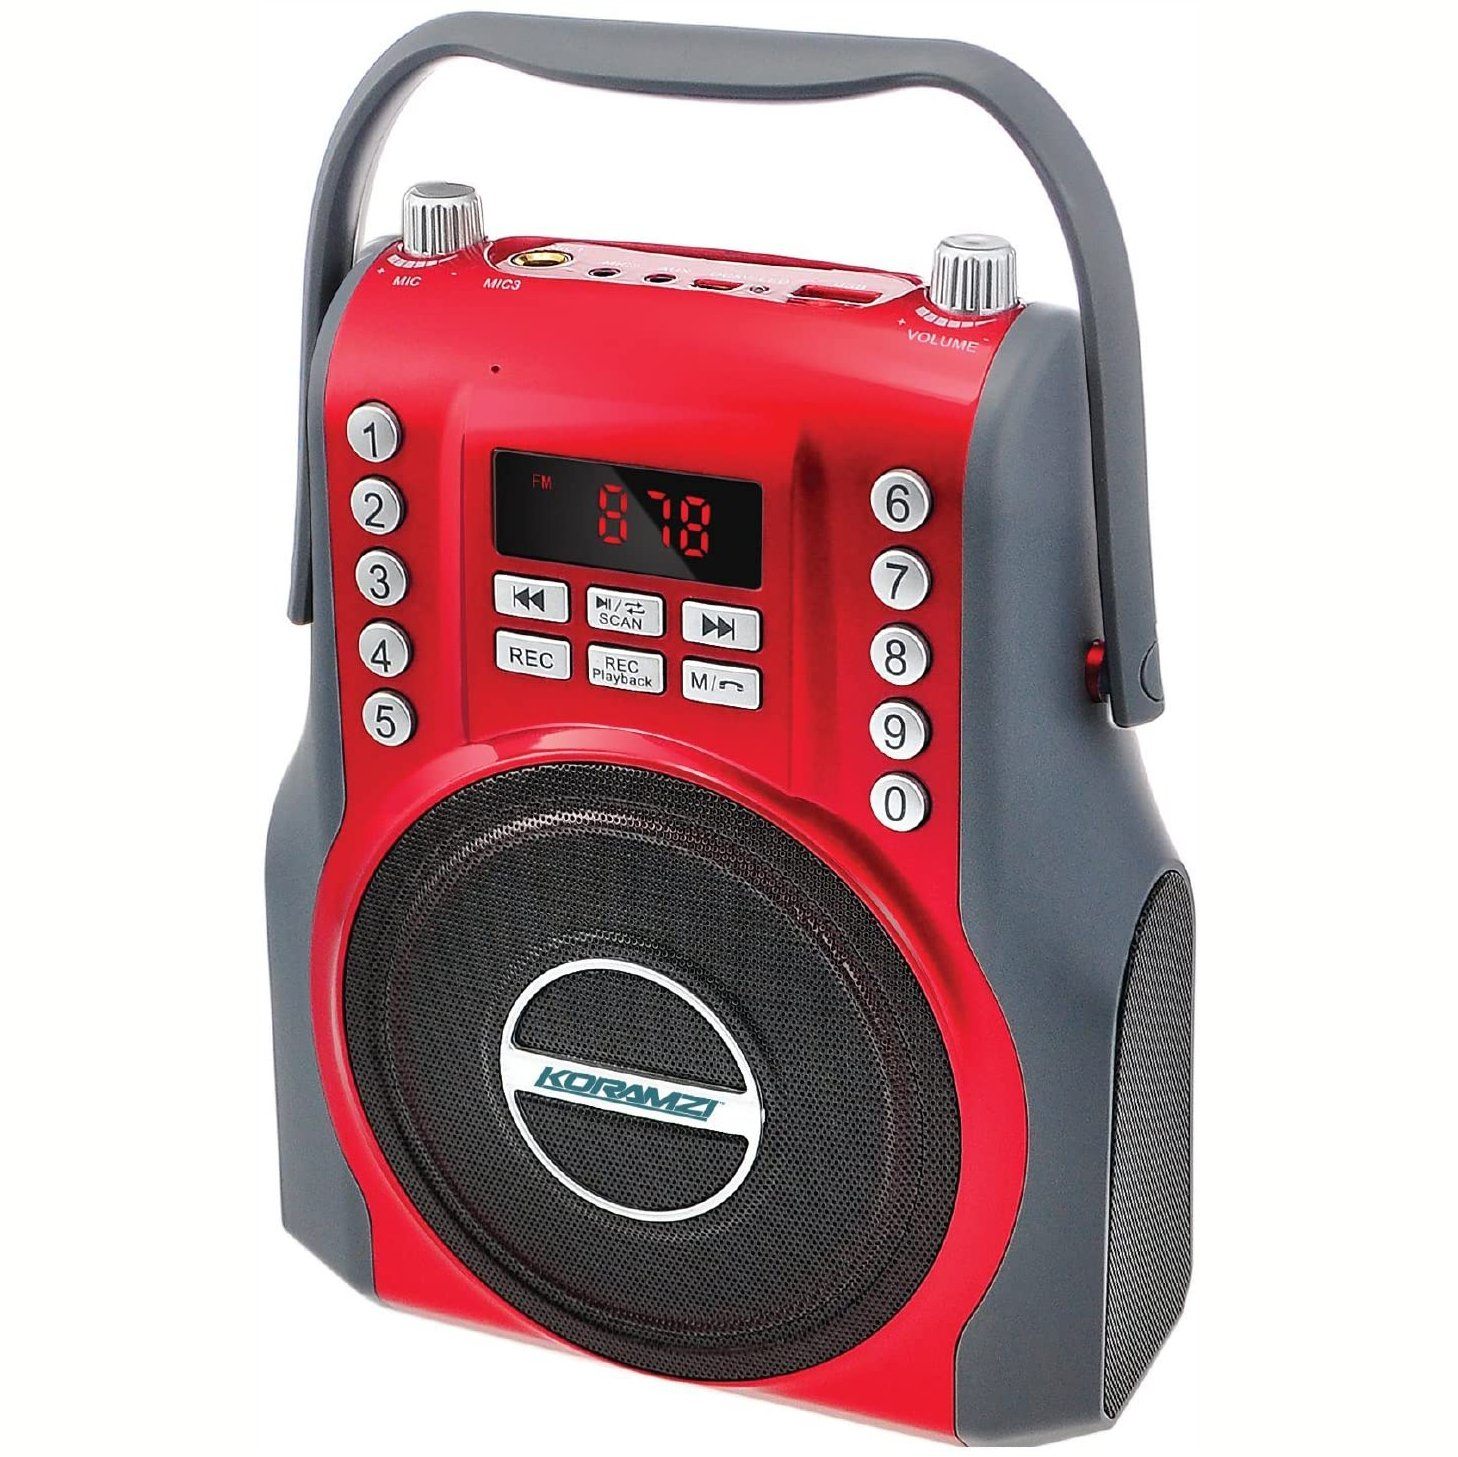 Koramzi Karaoke Portable Boombox with Bluetooth and Rechargeable Battery / Red